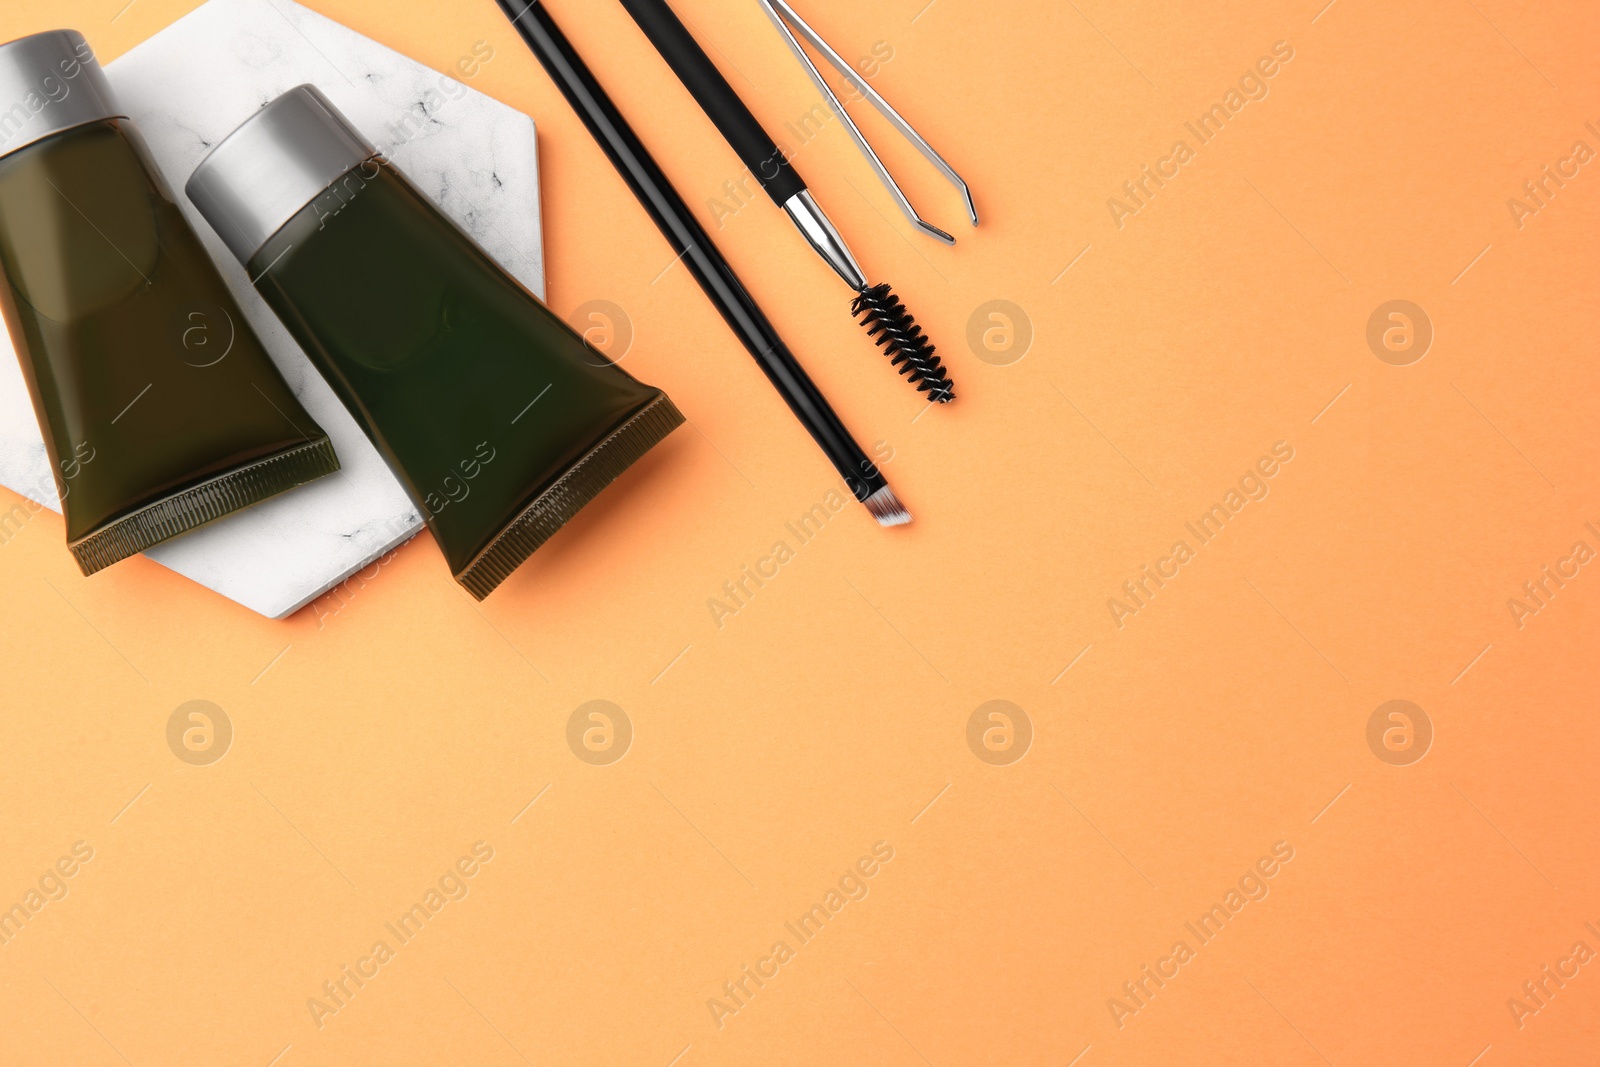 Photo of Flat lay composition with eyebrow henna, professional tools and cosmetic products on orange background, space for text